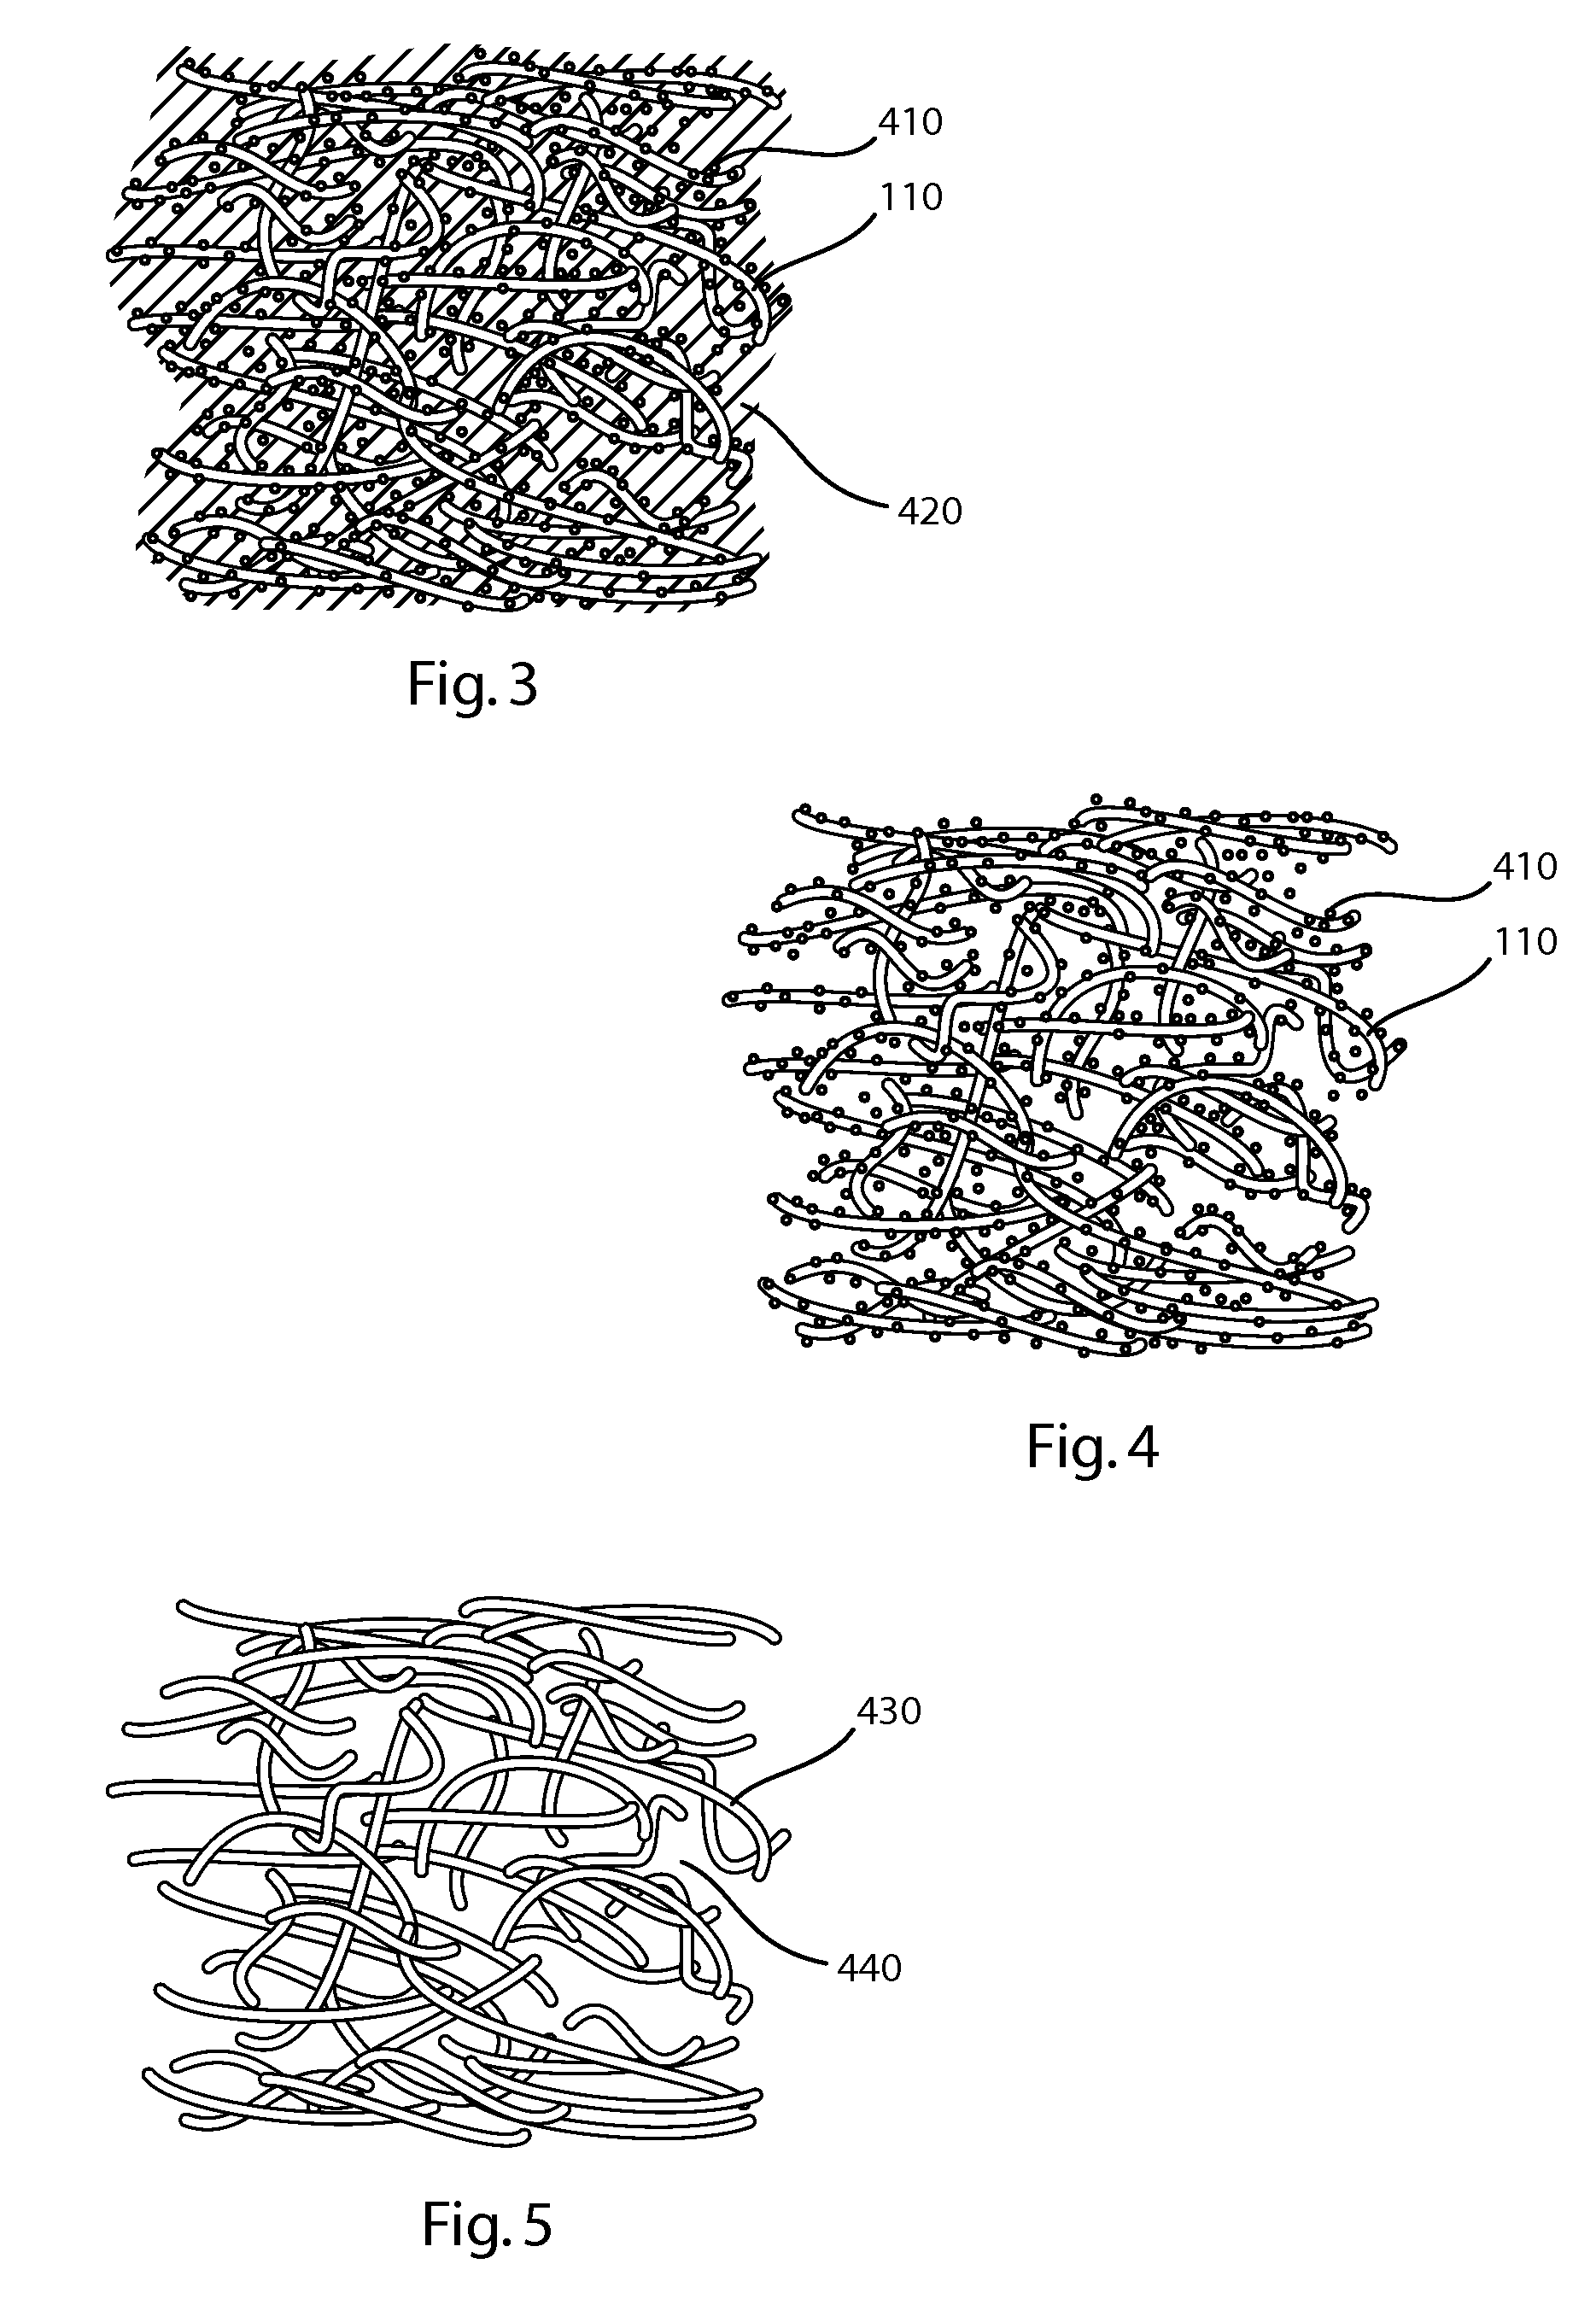 Extruded Fibrous Silicon Carbide Substrate and Methods for Producing the Same